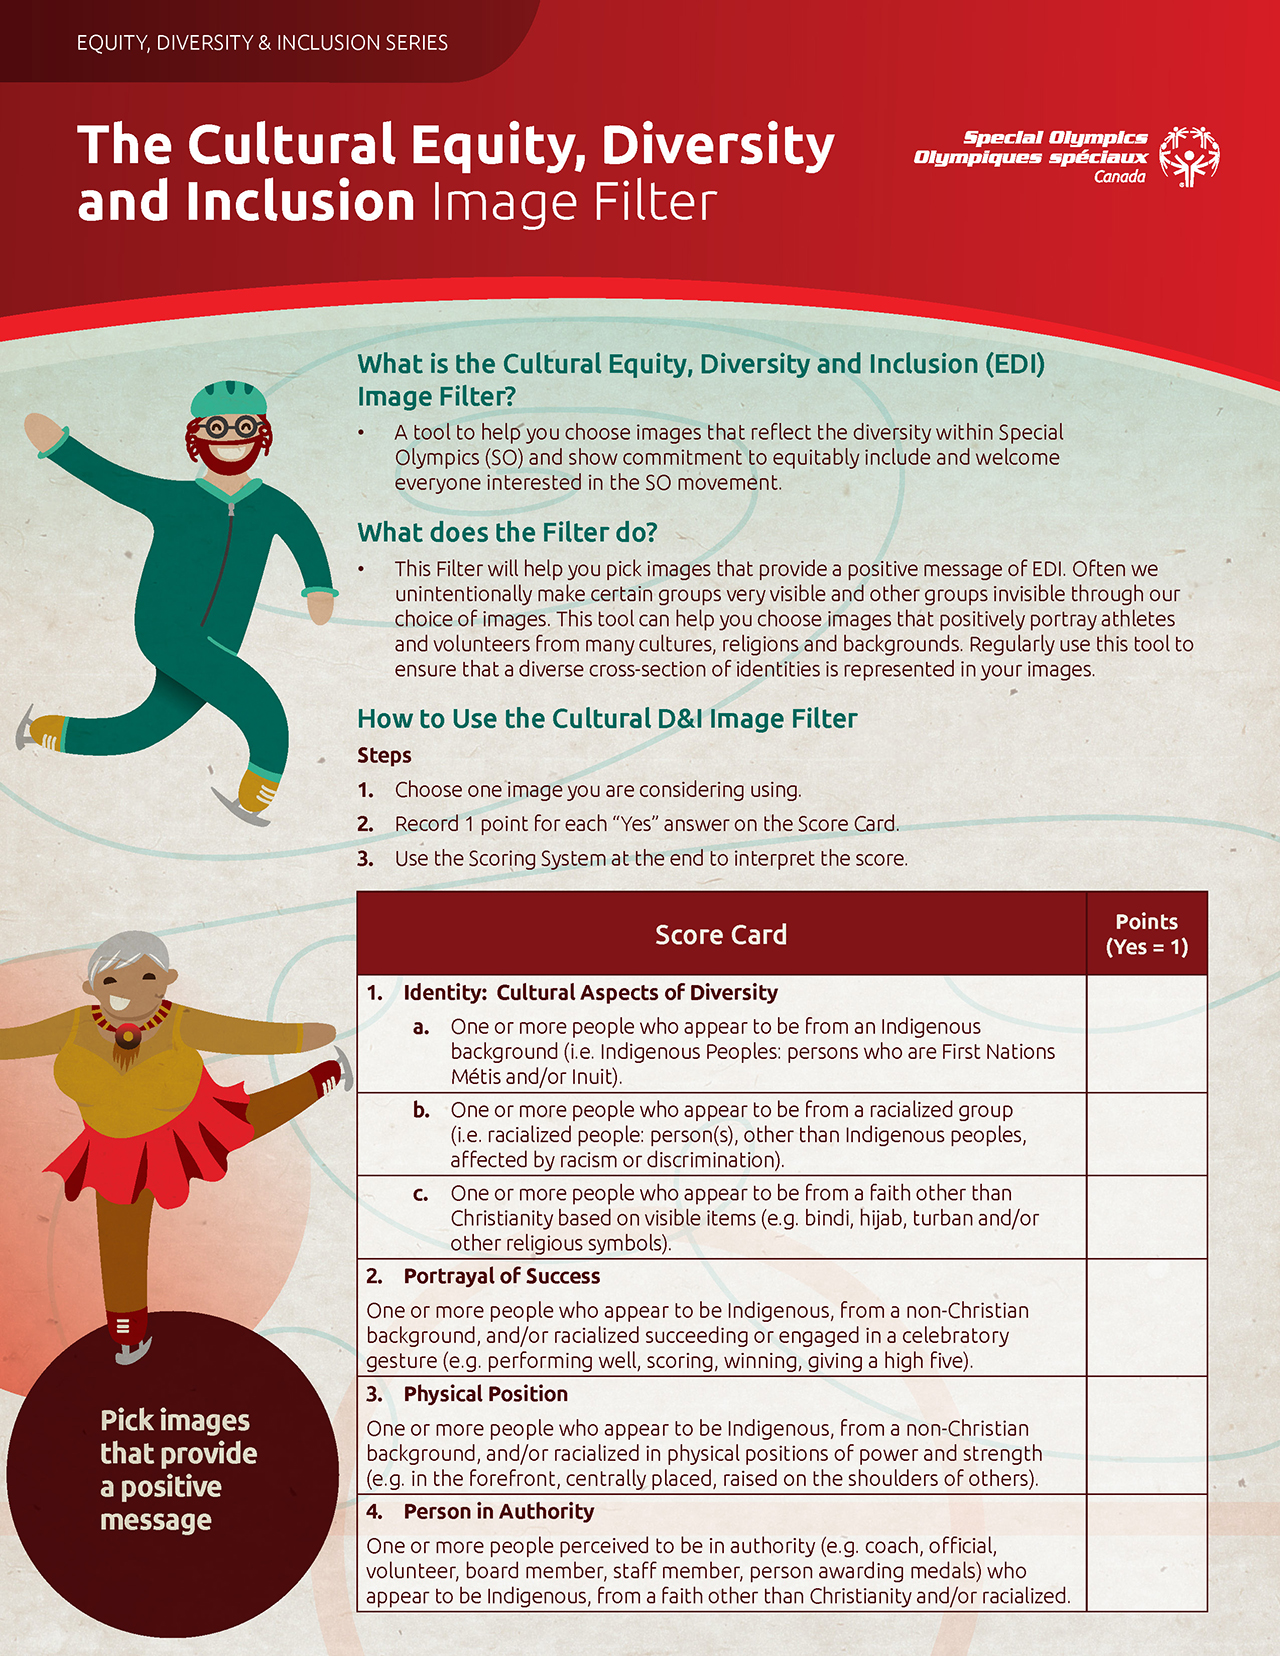 Equity, Diversity & Inclusion Image Filter